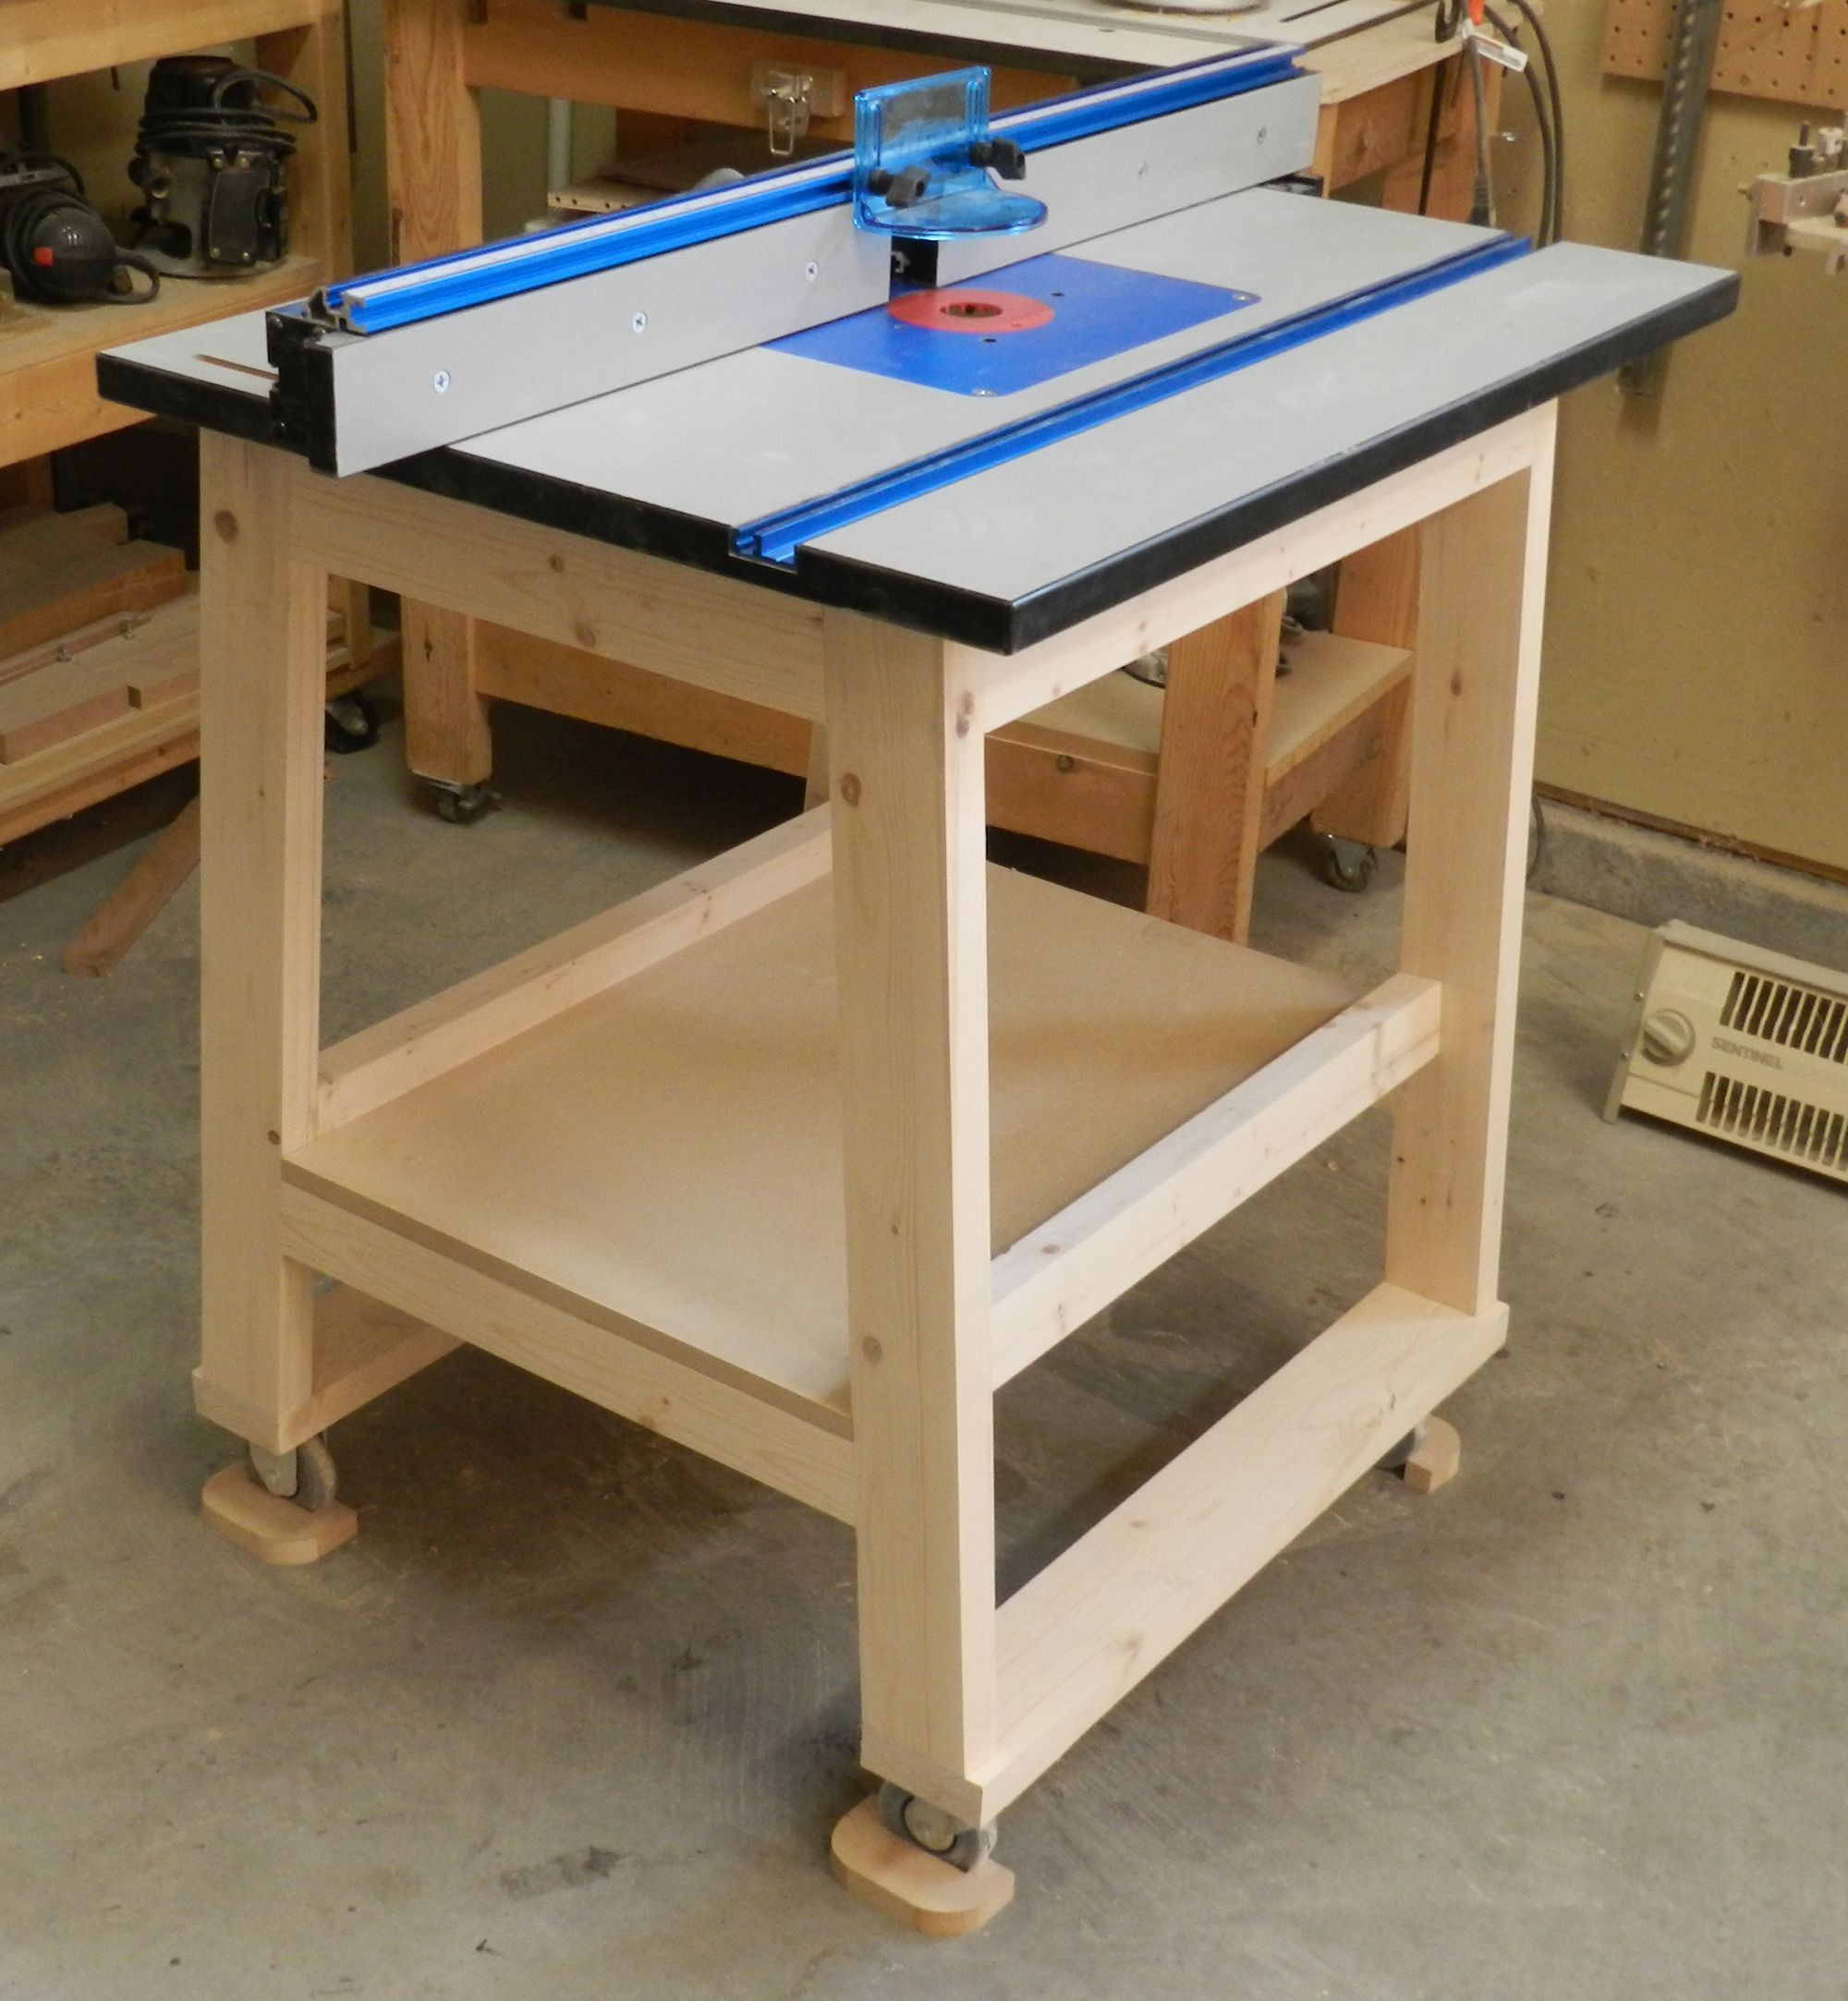 The Best Ideas for Diy Router Table Plans - Home, Family, Style and Art 